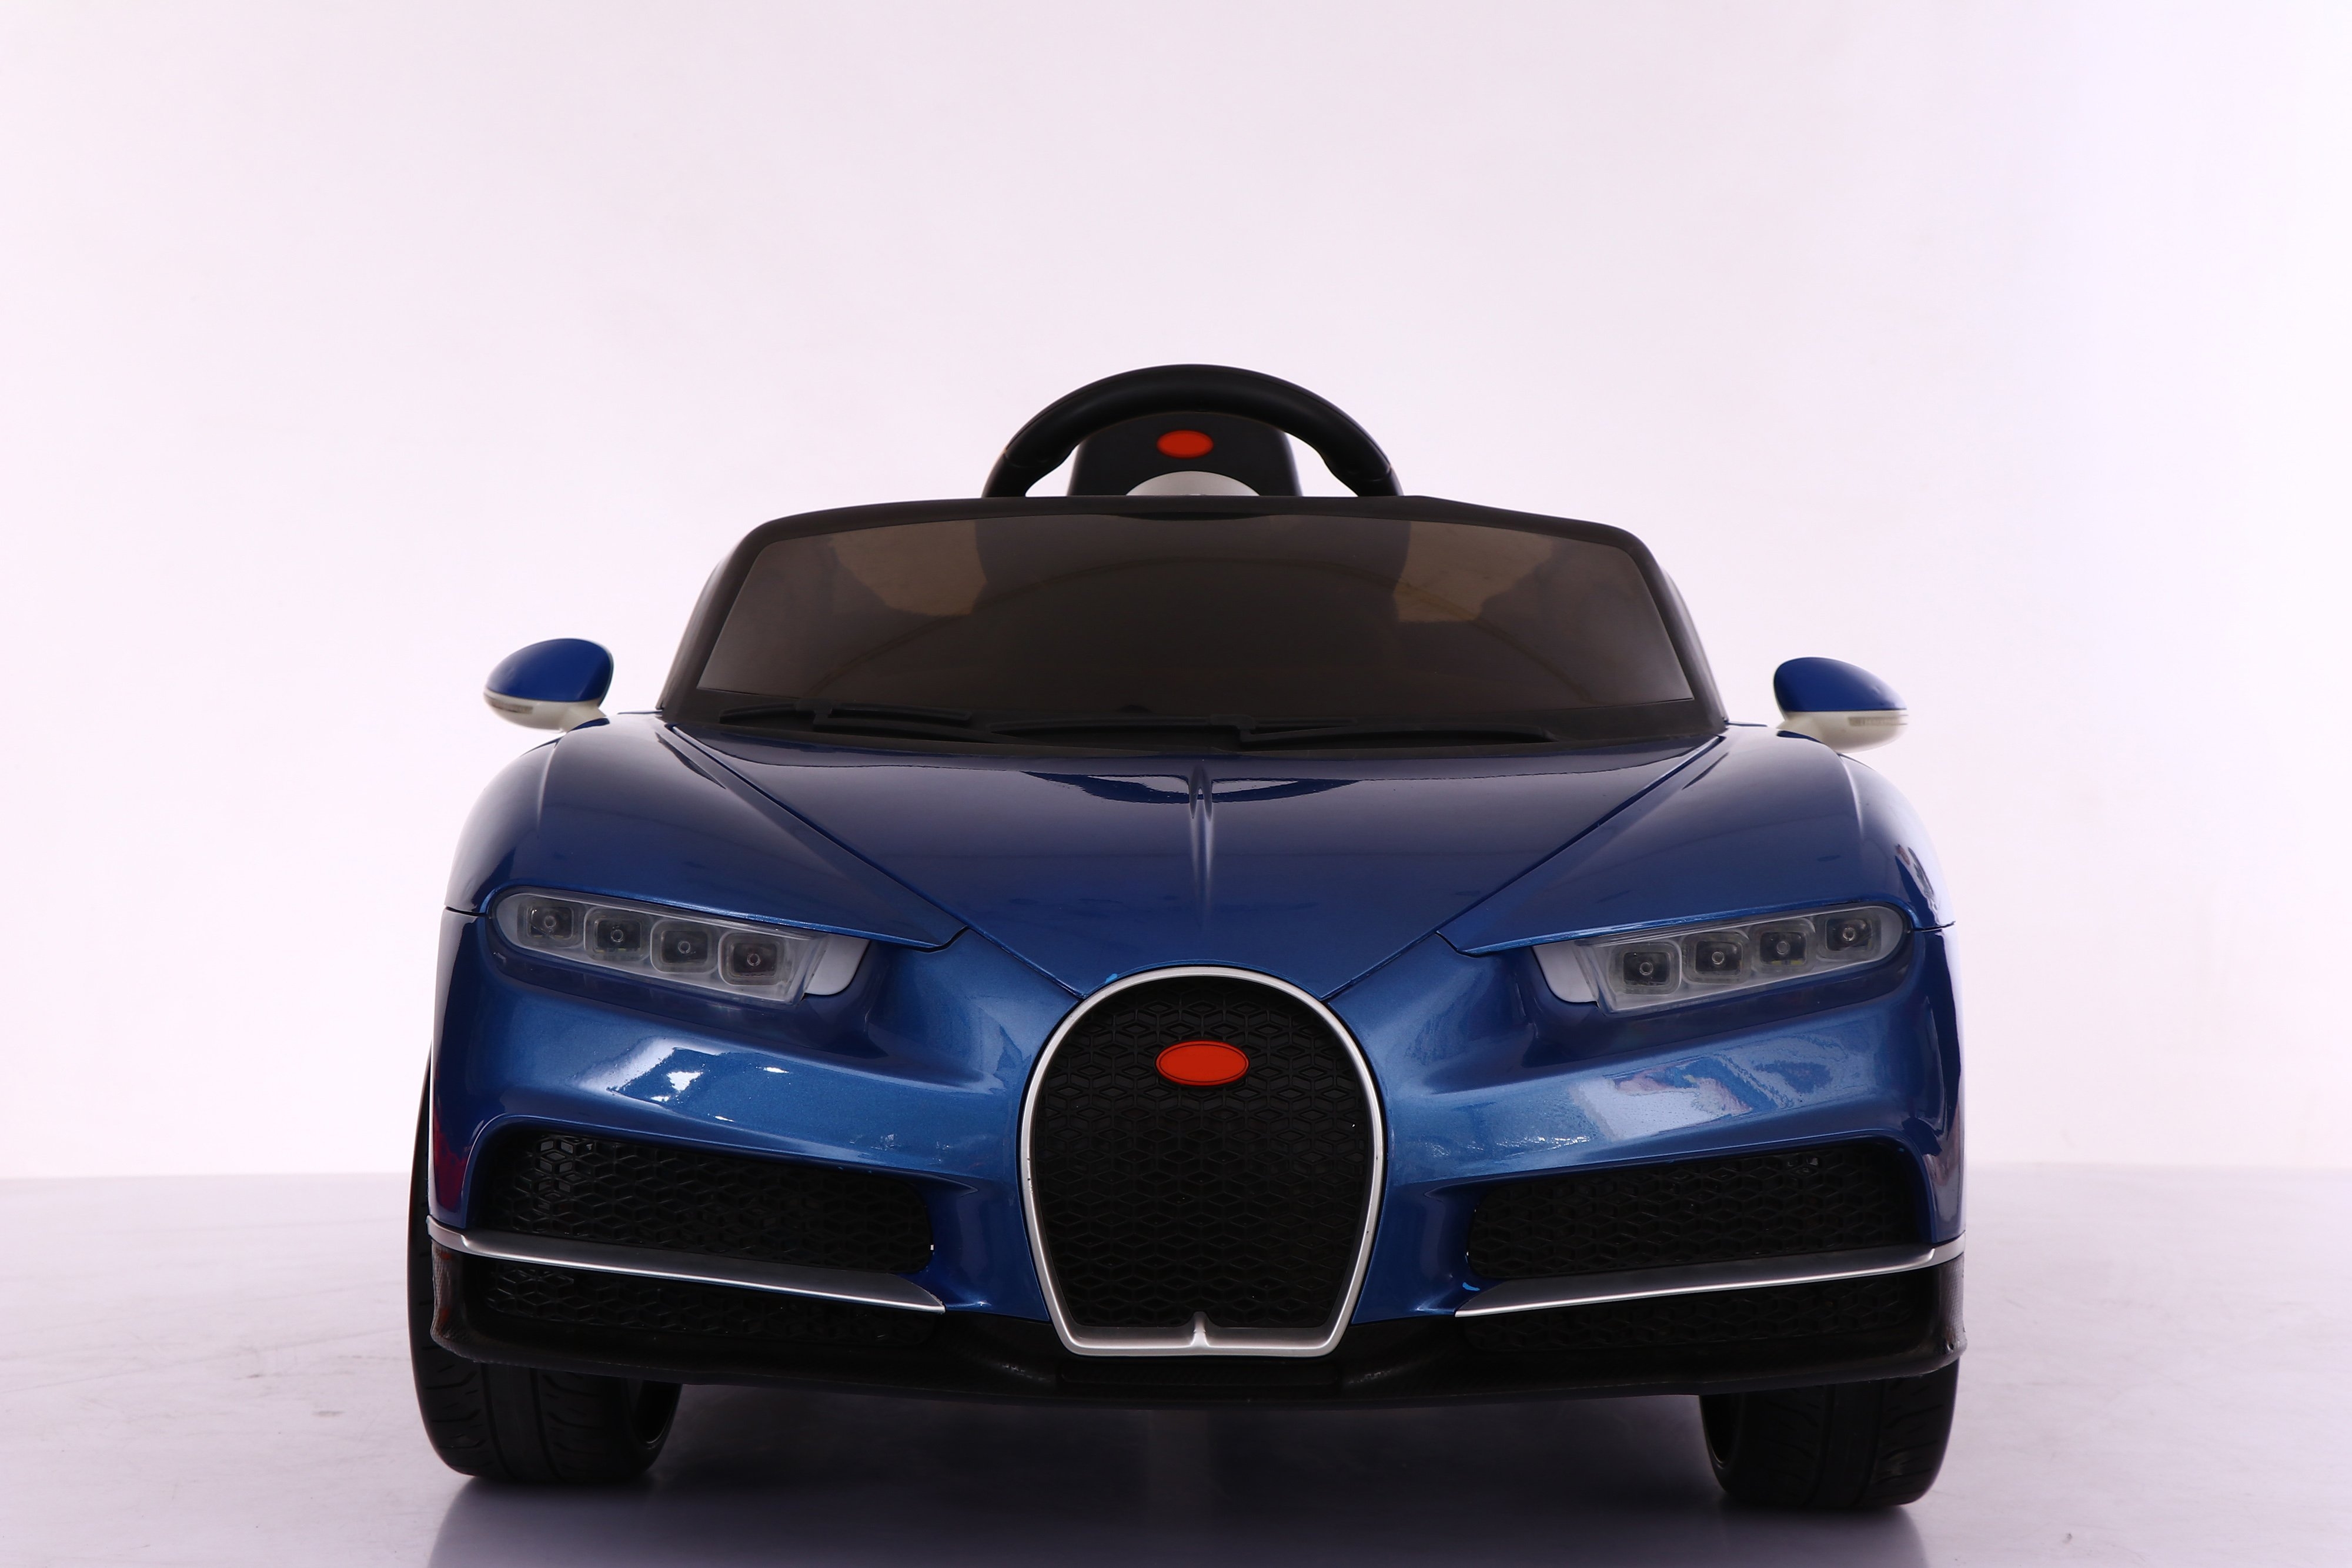 Licensed Bugatti Chiron Style Ride On Car 12V With Parental Control – Blue